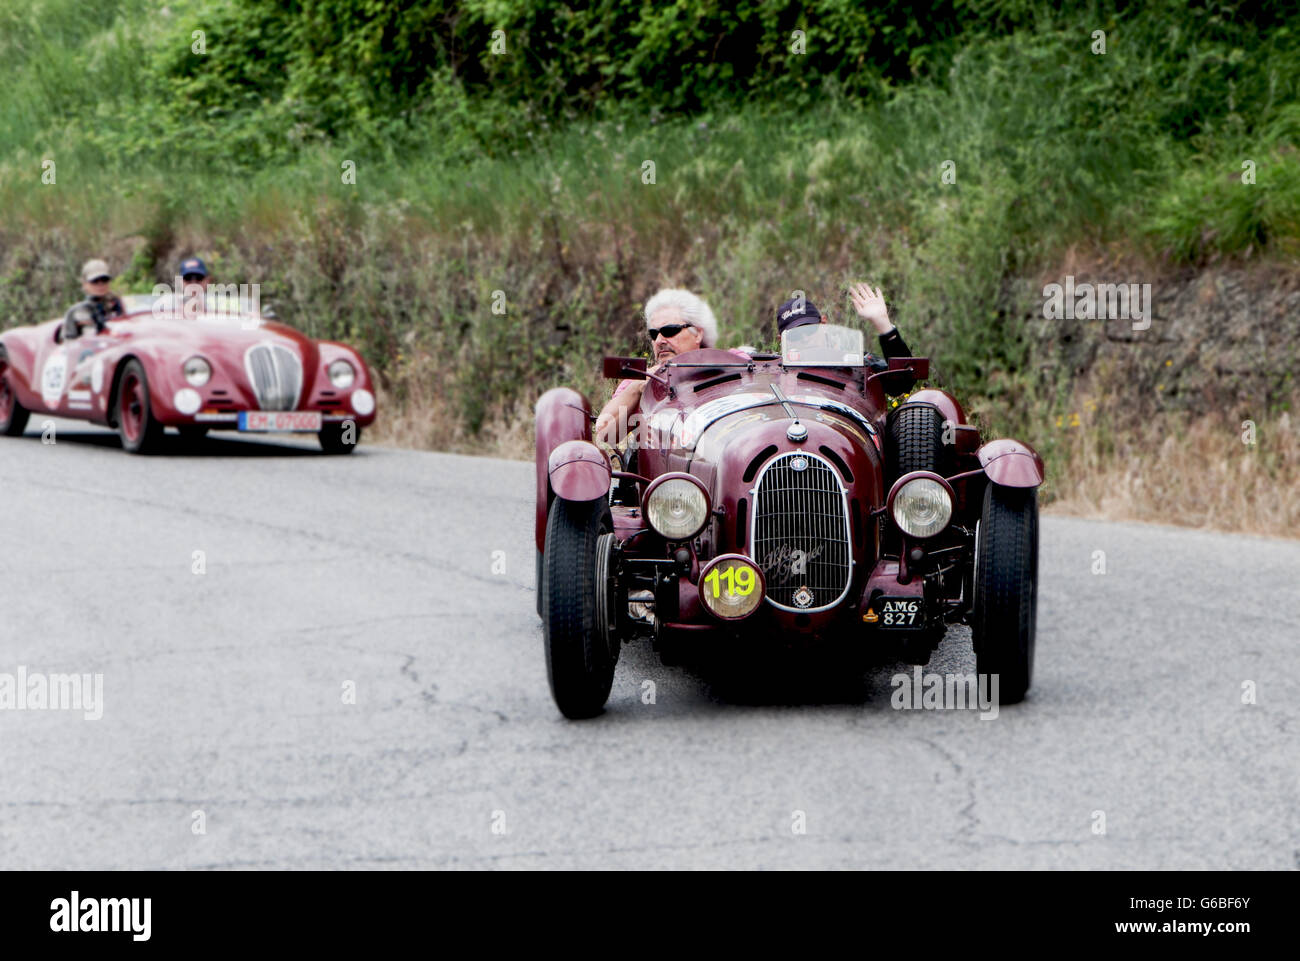 ALFA ROMEO 8C 2900 A 1936 in nidentified crew on an old racing car in rally Mille Miglia 2015 the famous italian historical race Stock Photo